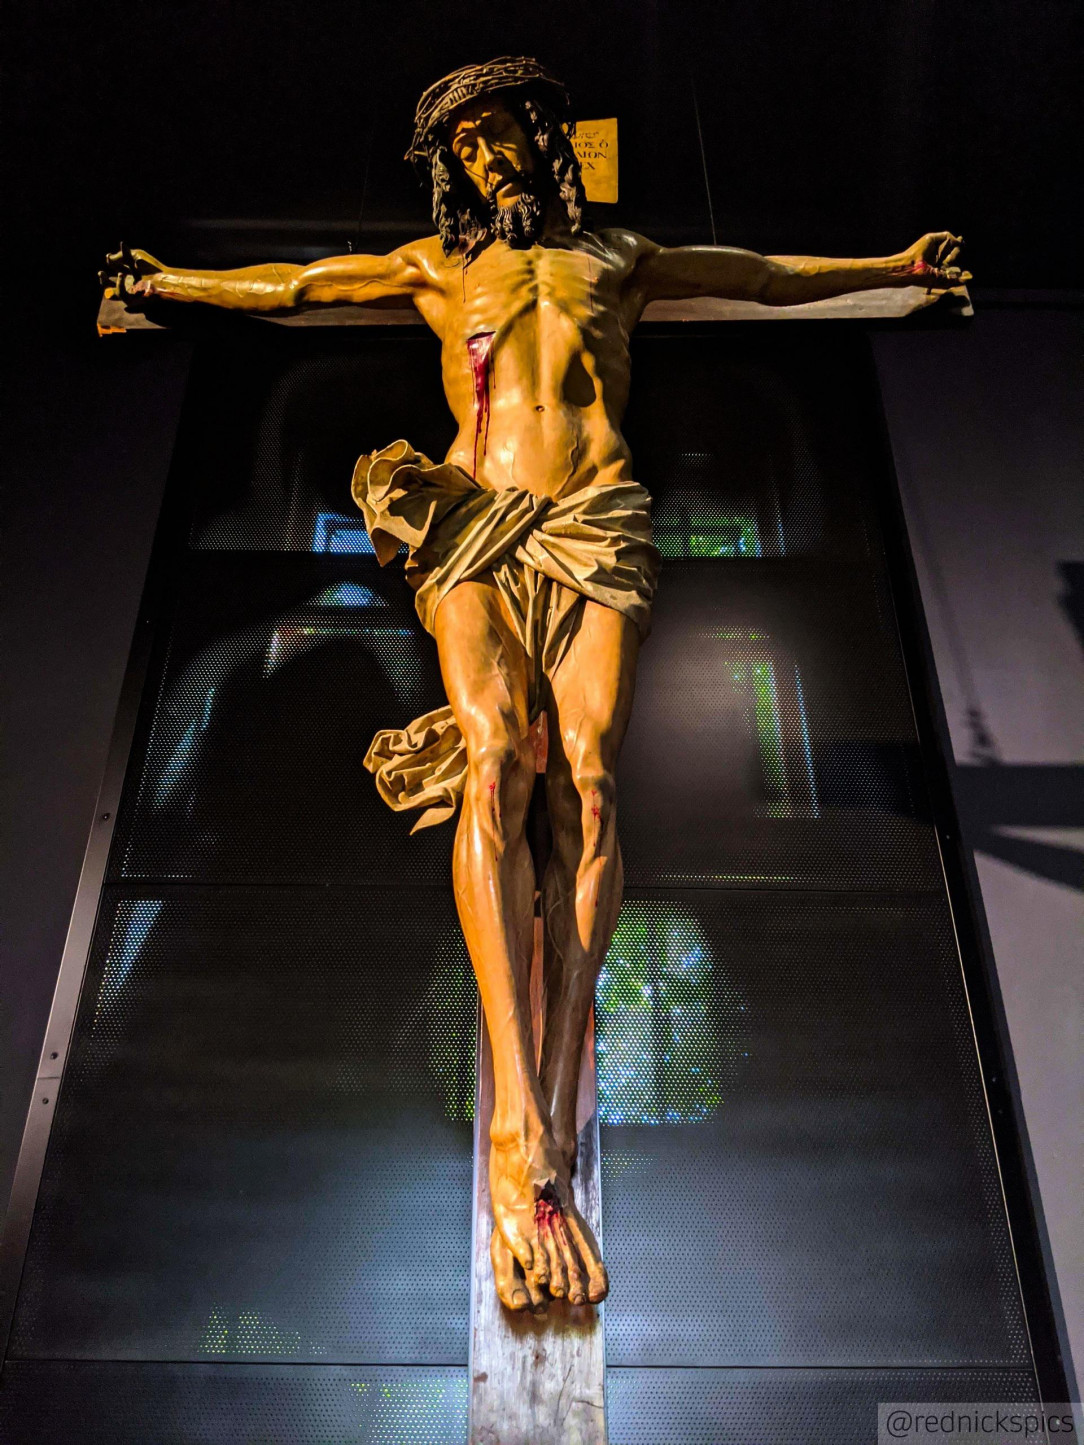 Dali-esque and modern vibes of this Christ at the Medieval gallery of the National Museum in Warsaw, Poland